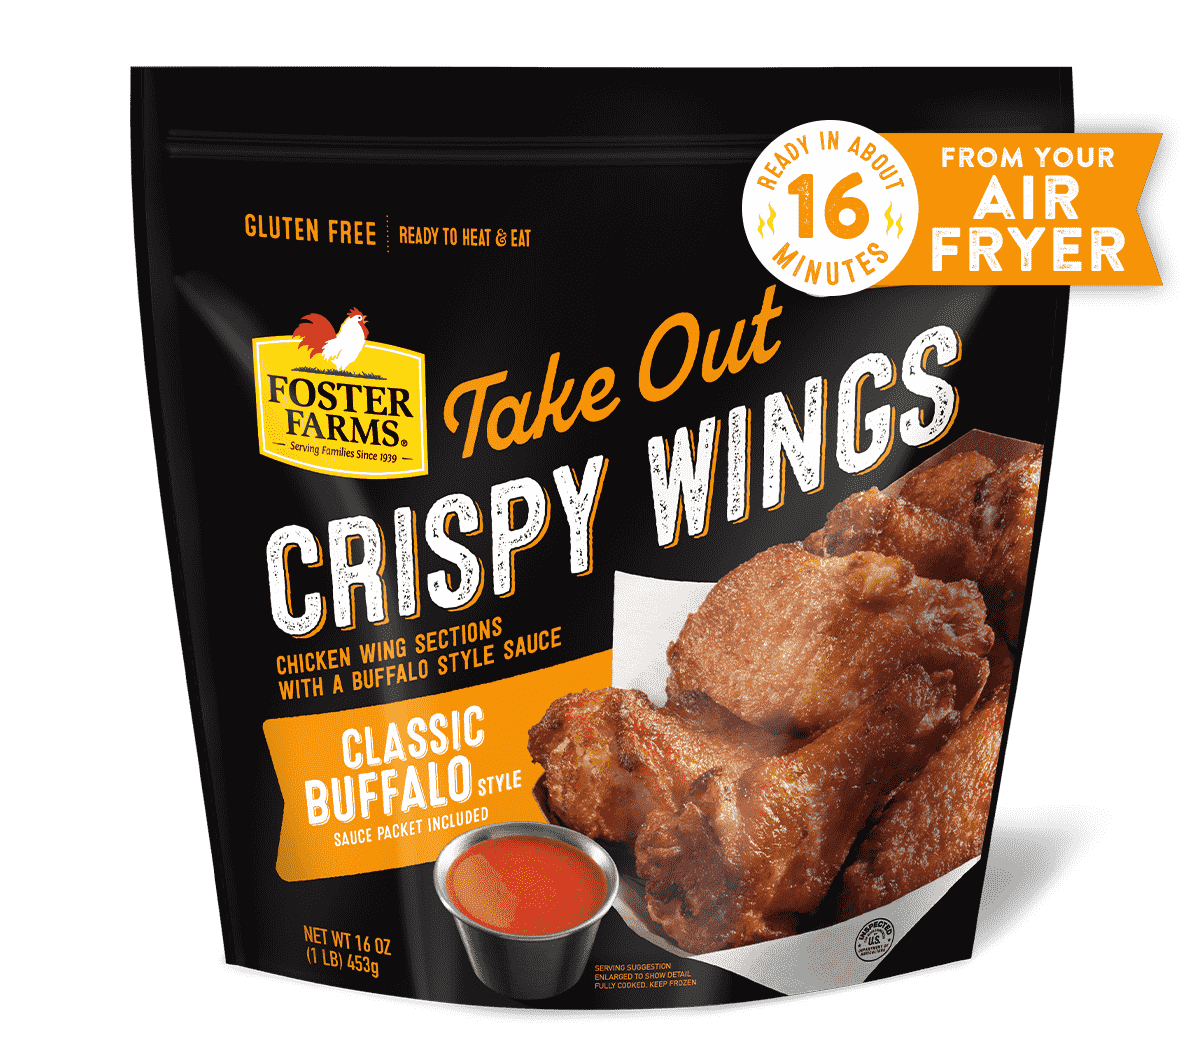 Organic Chicken Wings at Whole Foods Market